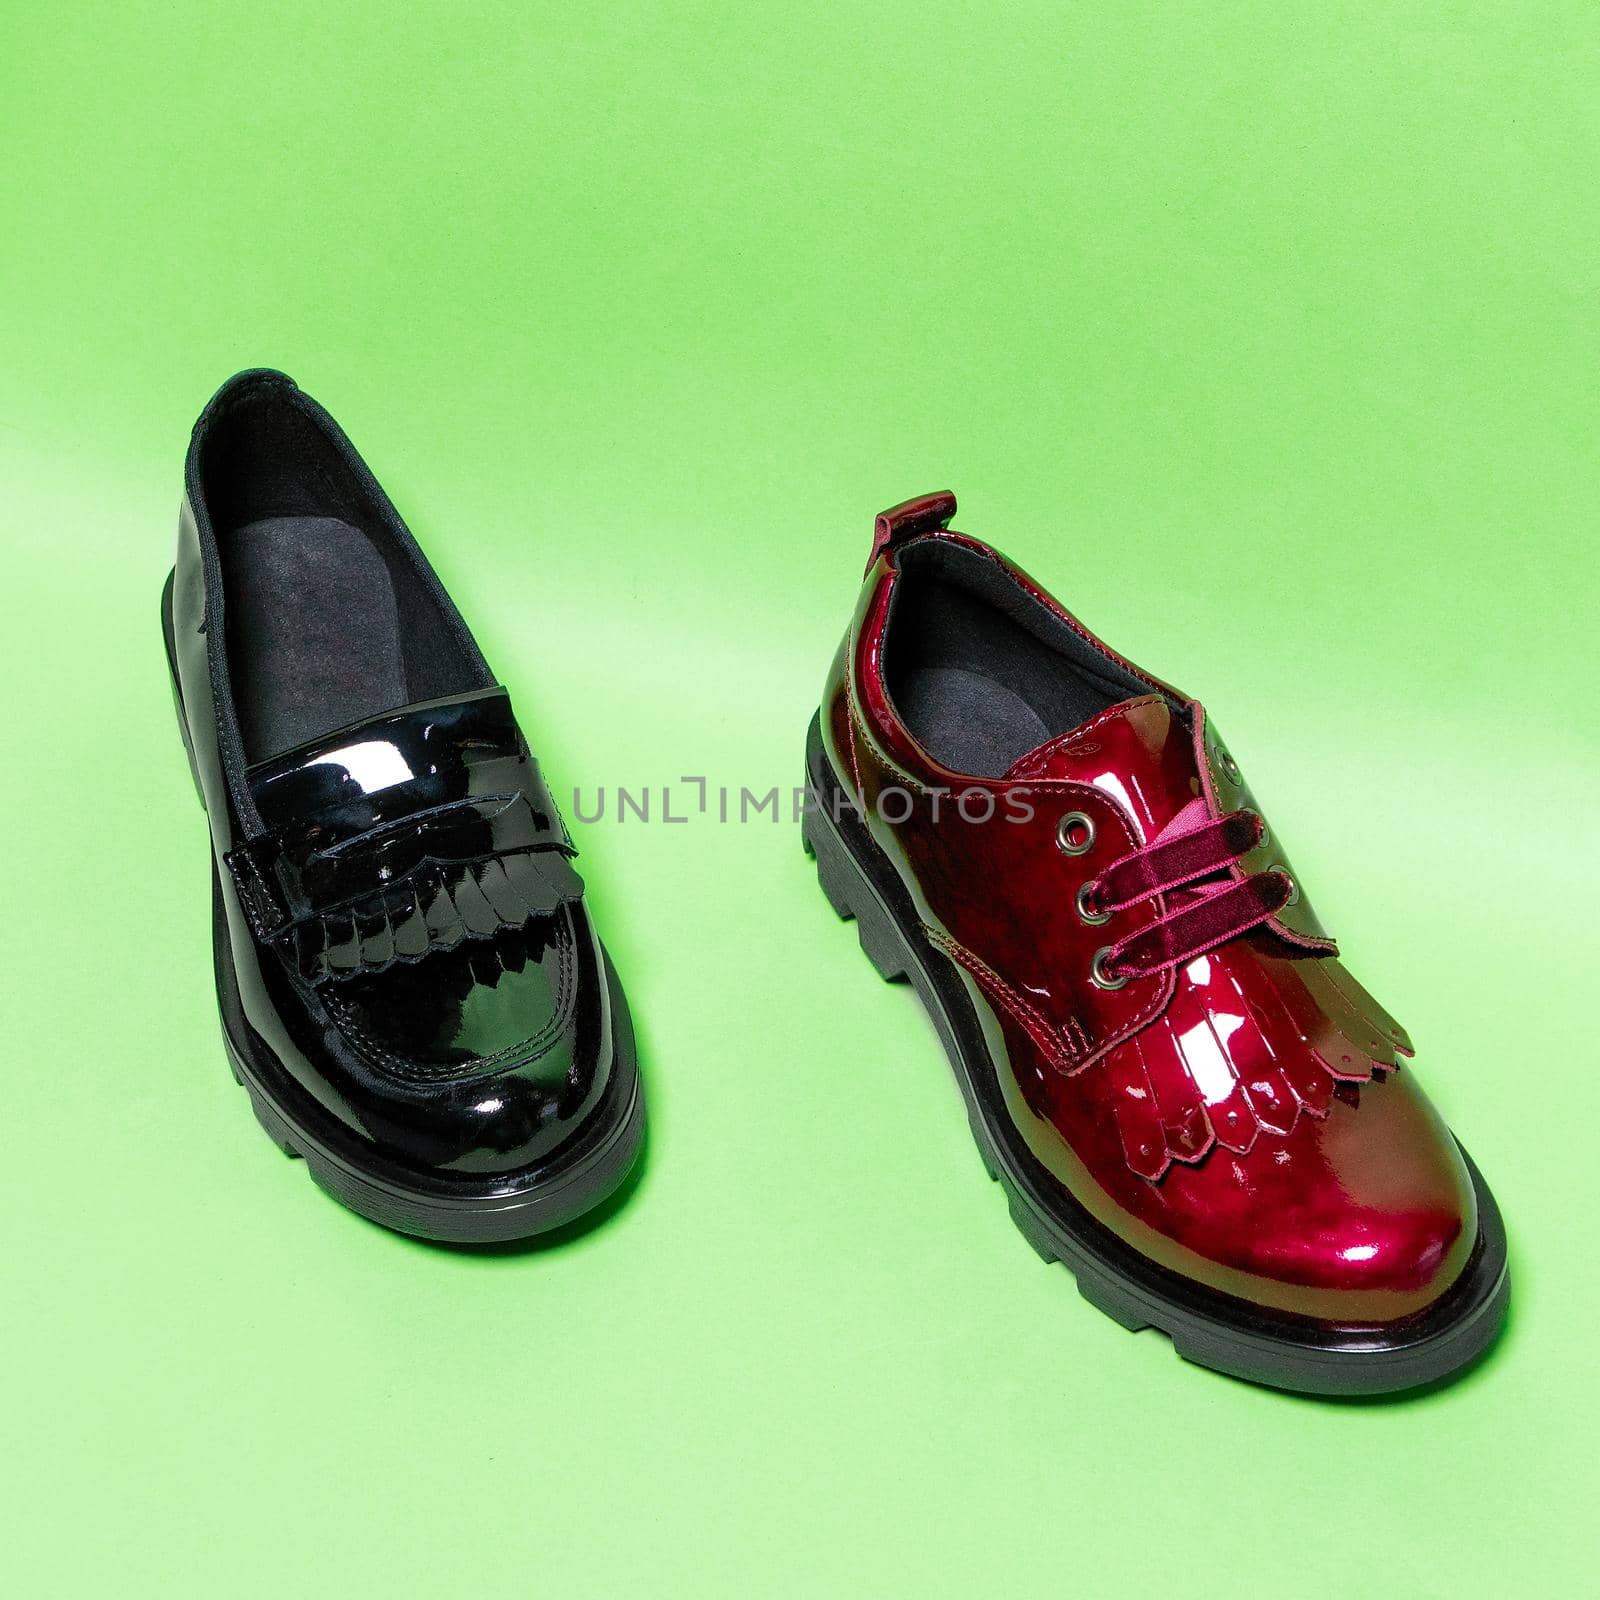 Red and black shiny male shoes isolated